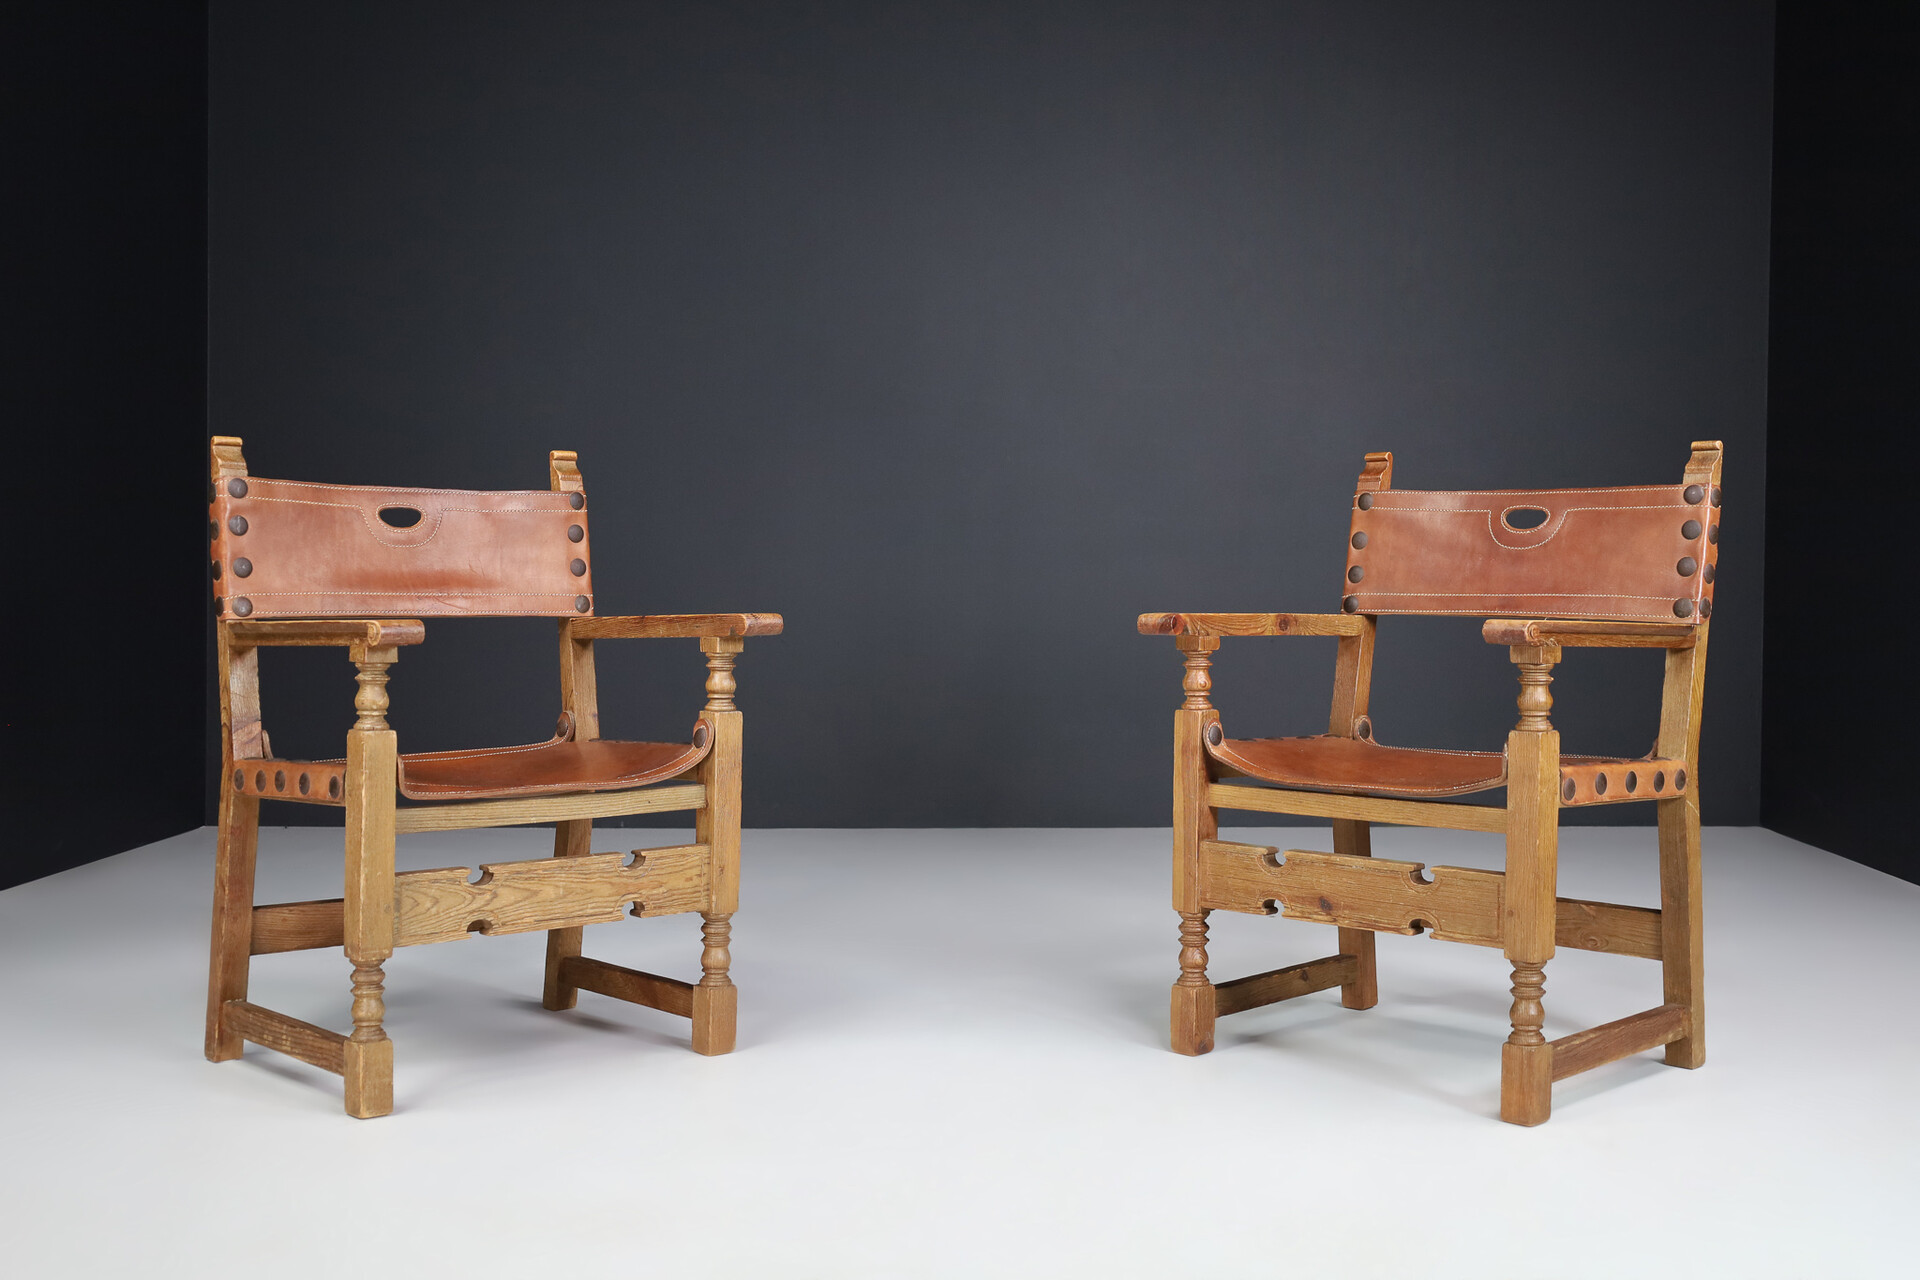 French provincial Midcentury Arm Chairs In Patinated Cognac Saddle Leather, France 1950s Mid-20th century